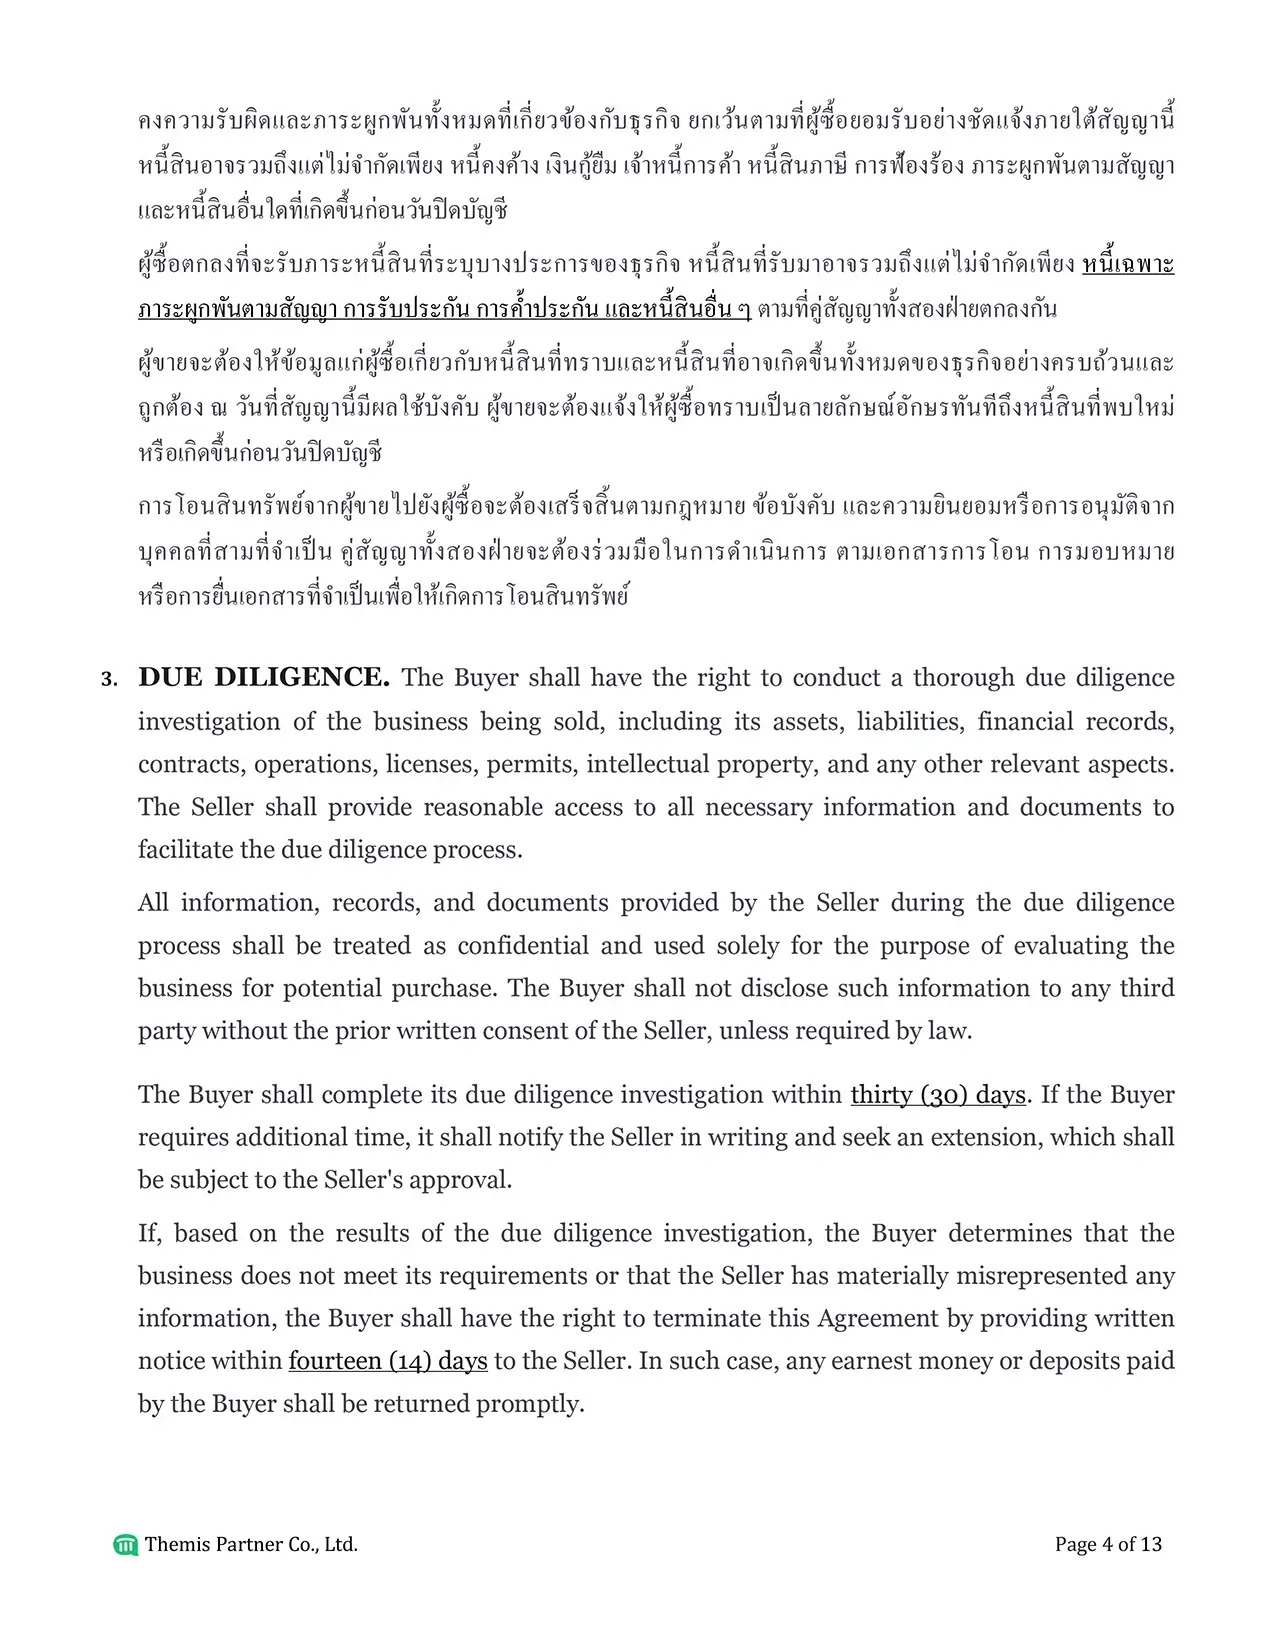 Business purchase agreement Thailand 4